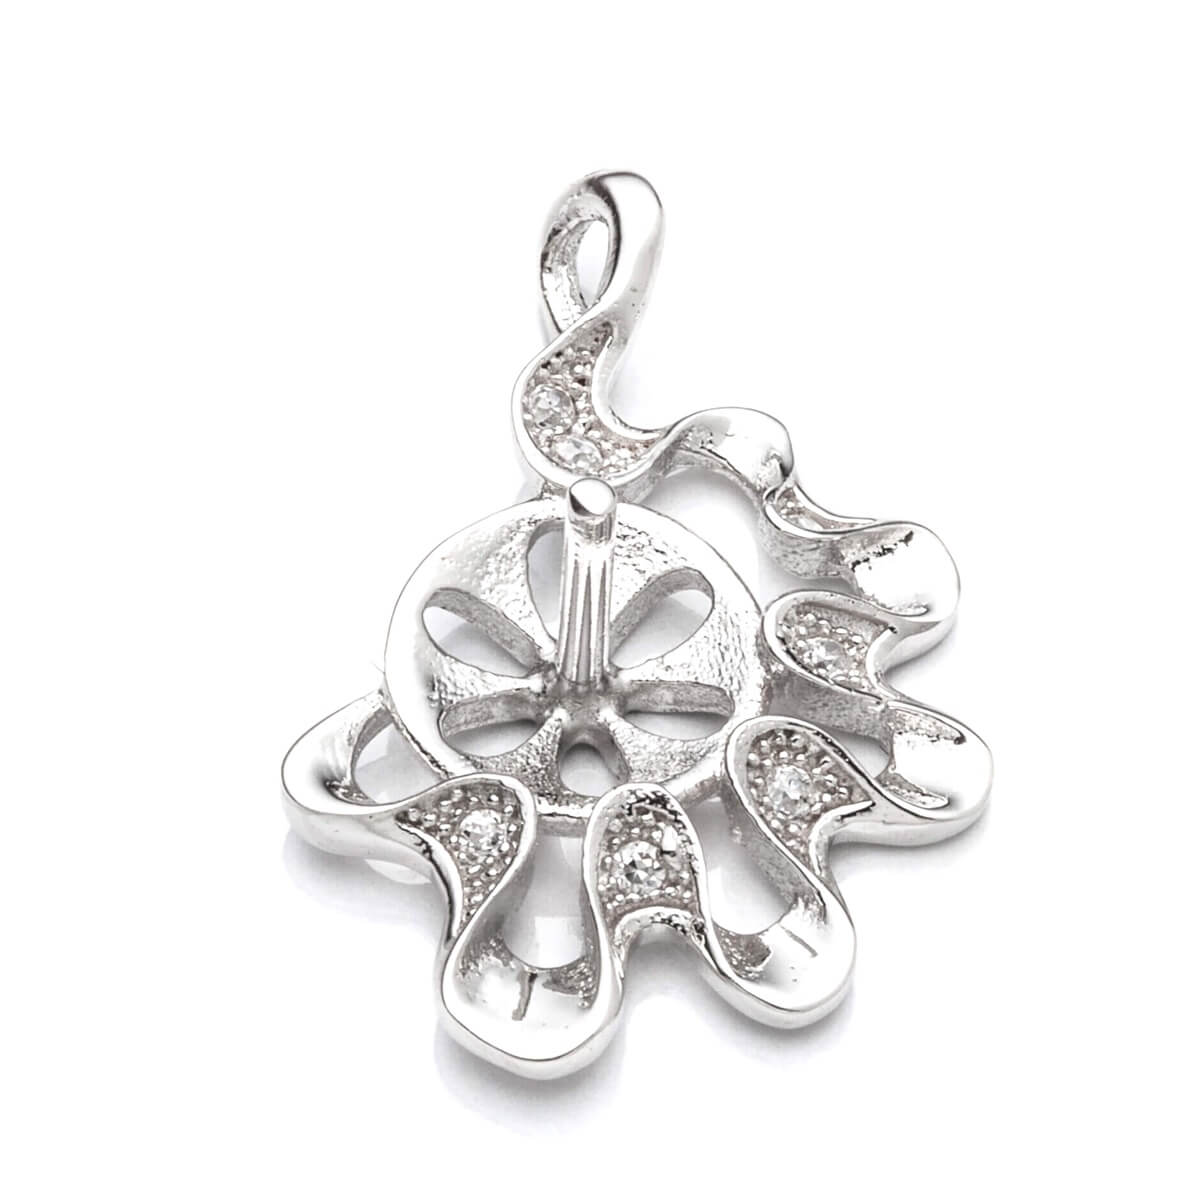 Pendant with Cubic Zirconia Inlays and Cup and Peg Mounting in Sterling Silver 6mm 